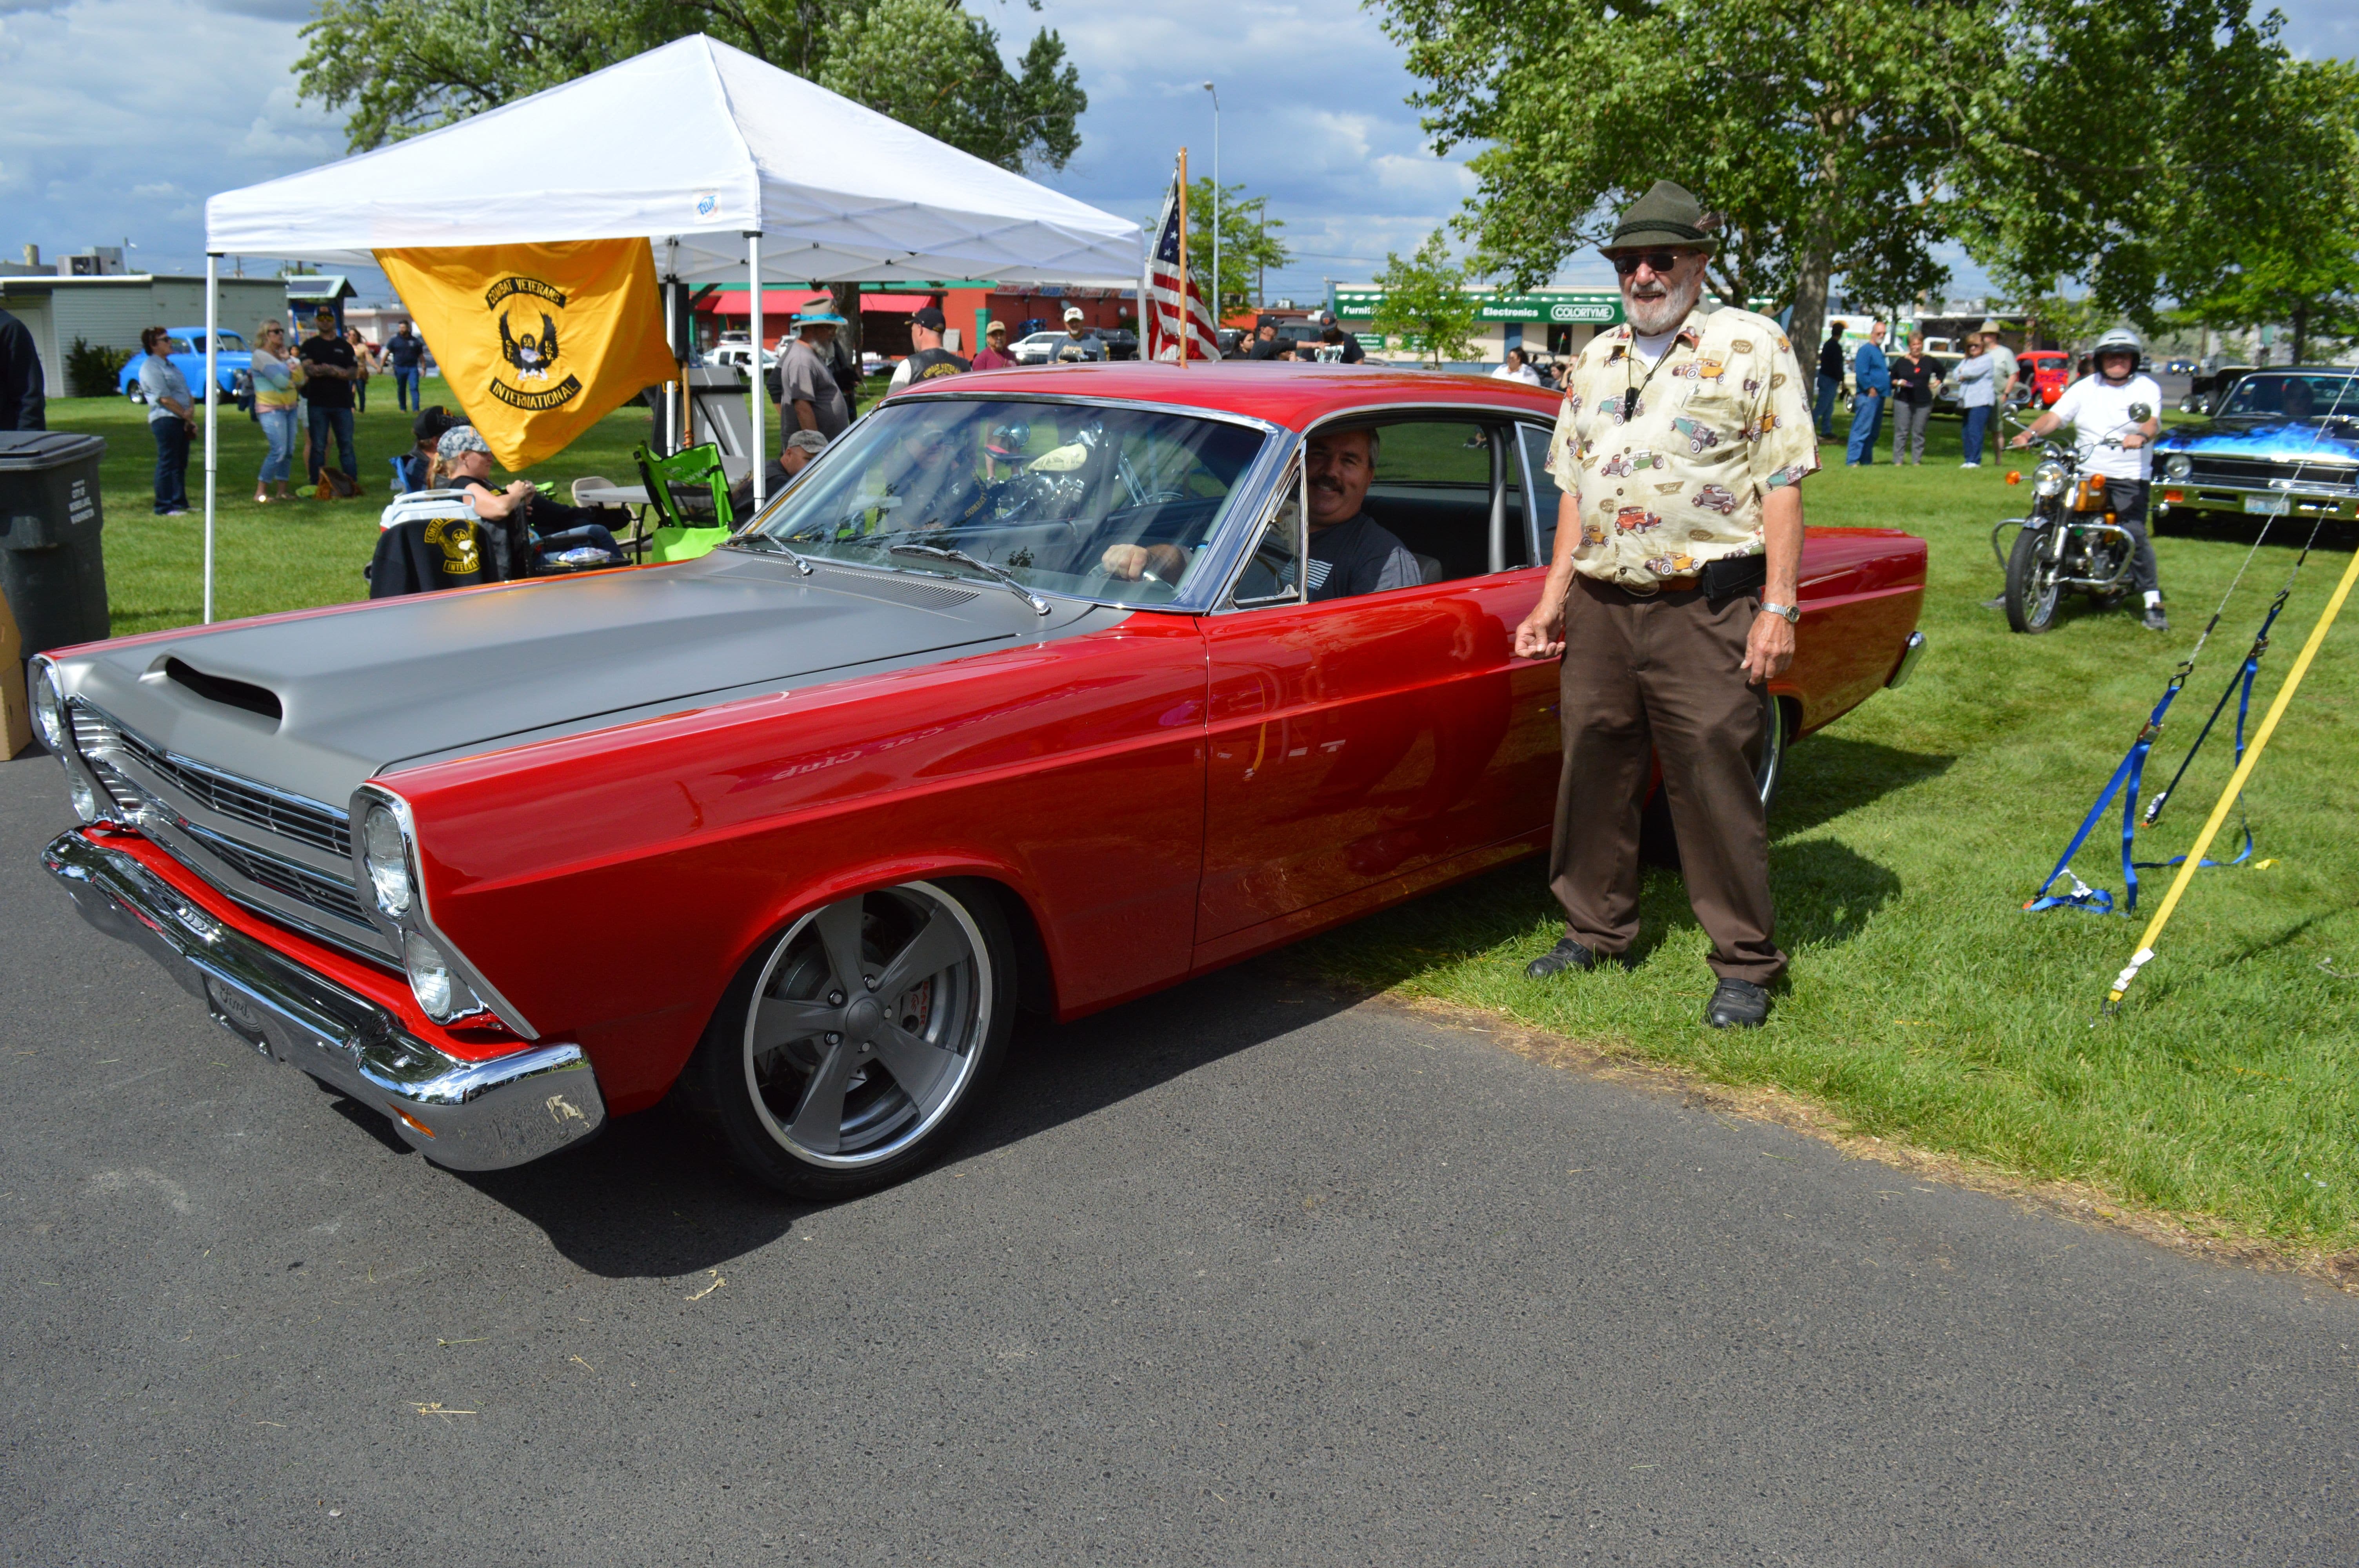 1966 Ford Fairlane - Best of Show - Dave Verhey